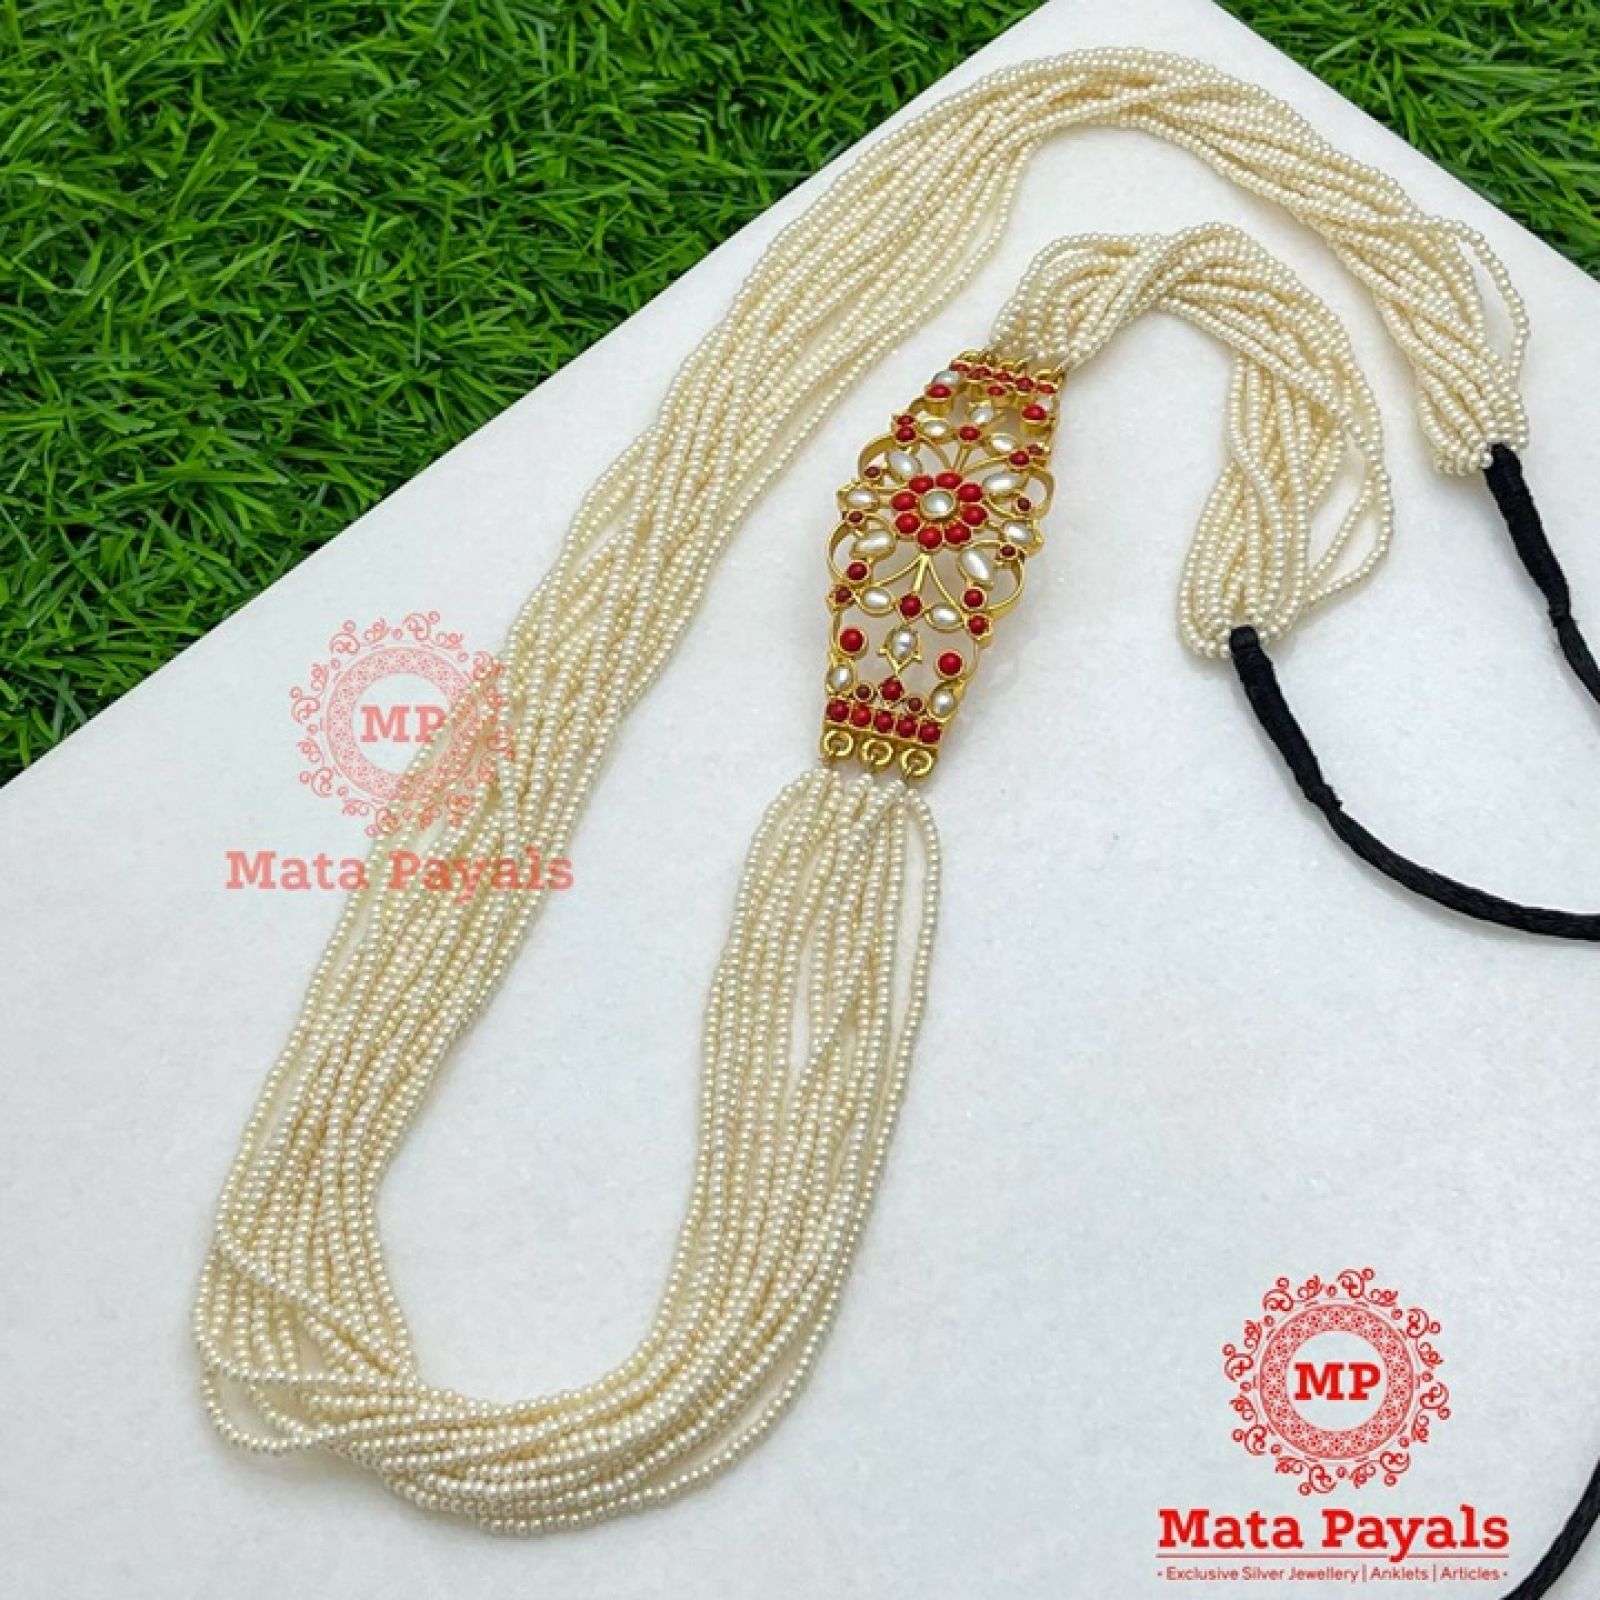 Charming Clustered Pearl Mop Necklace